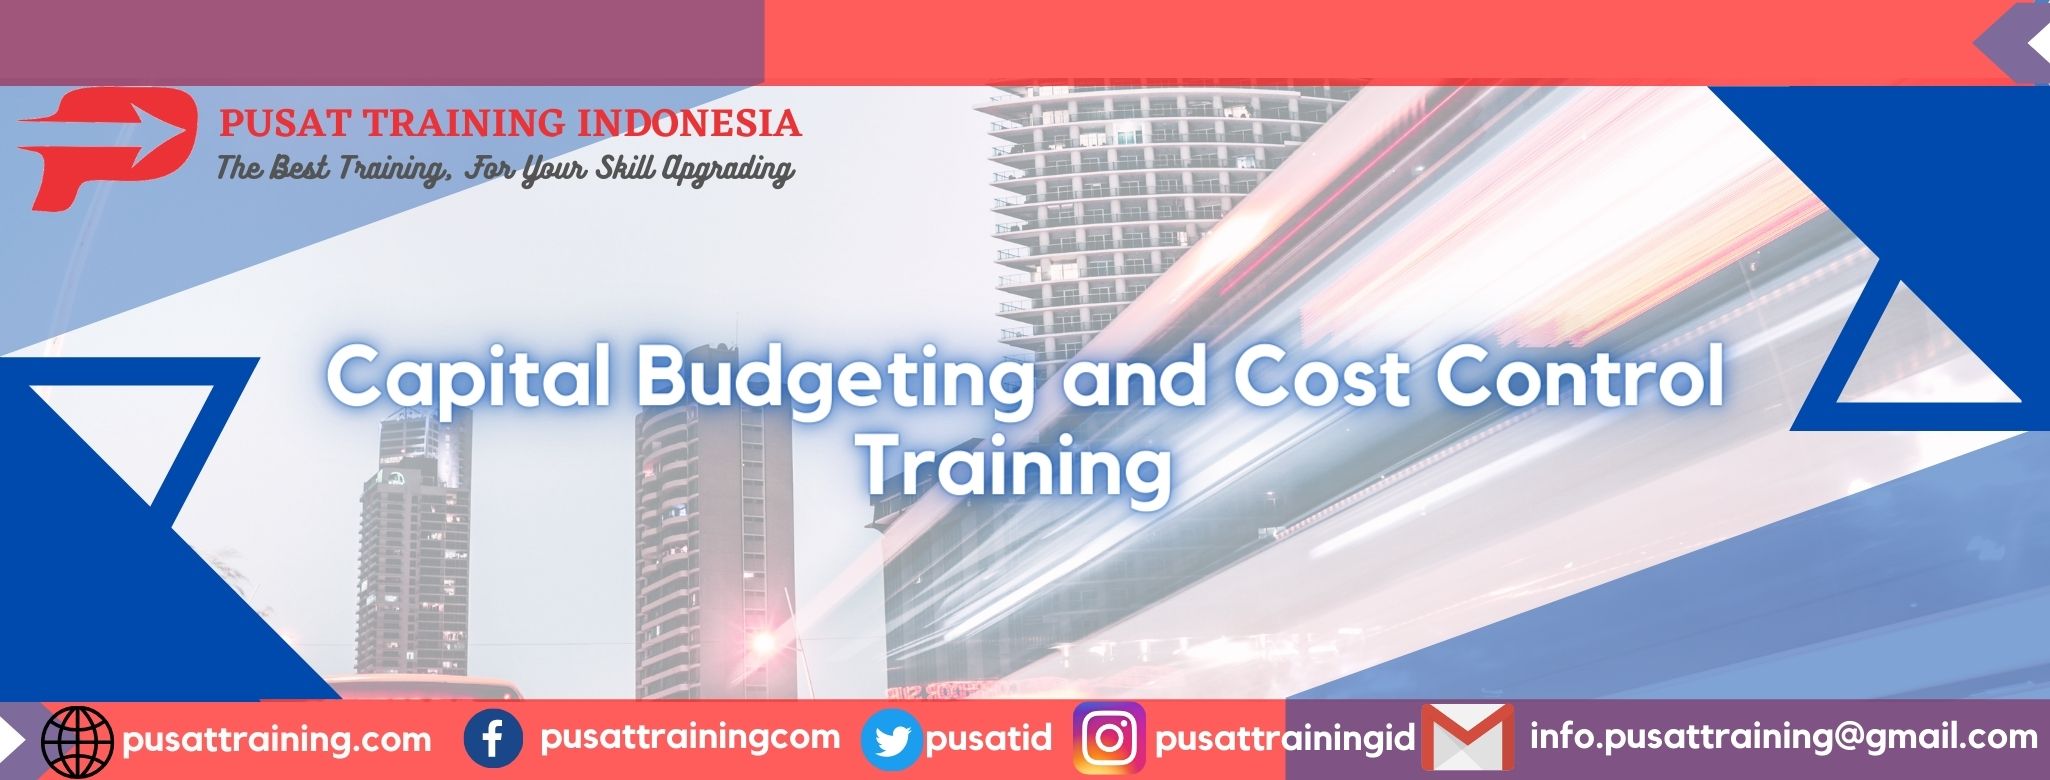 Capital-Budgeting-and-Cost-Control-Training